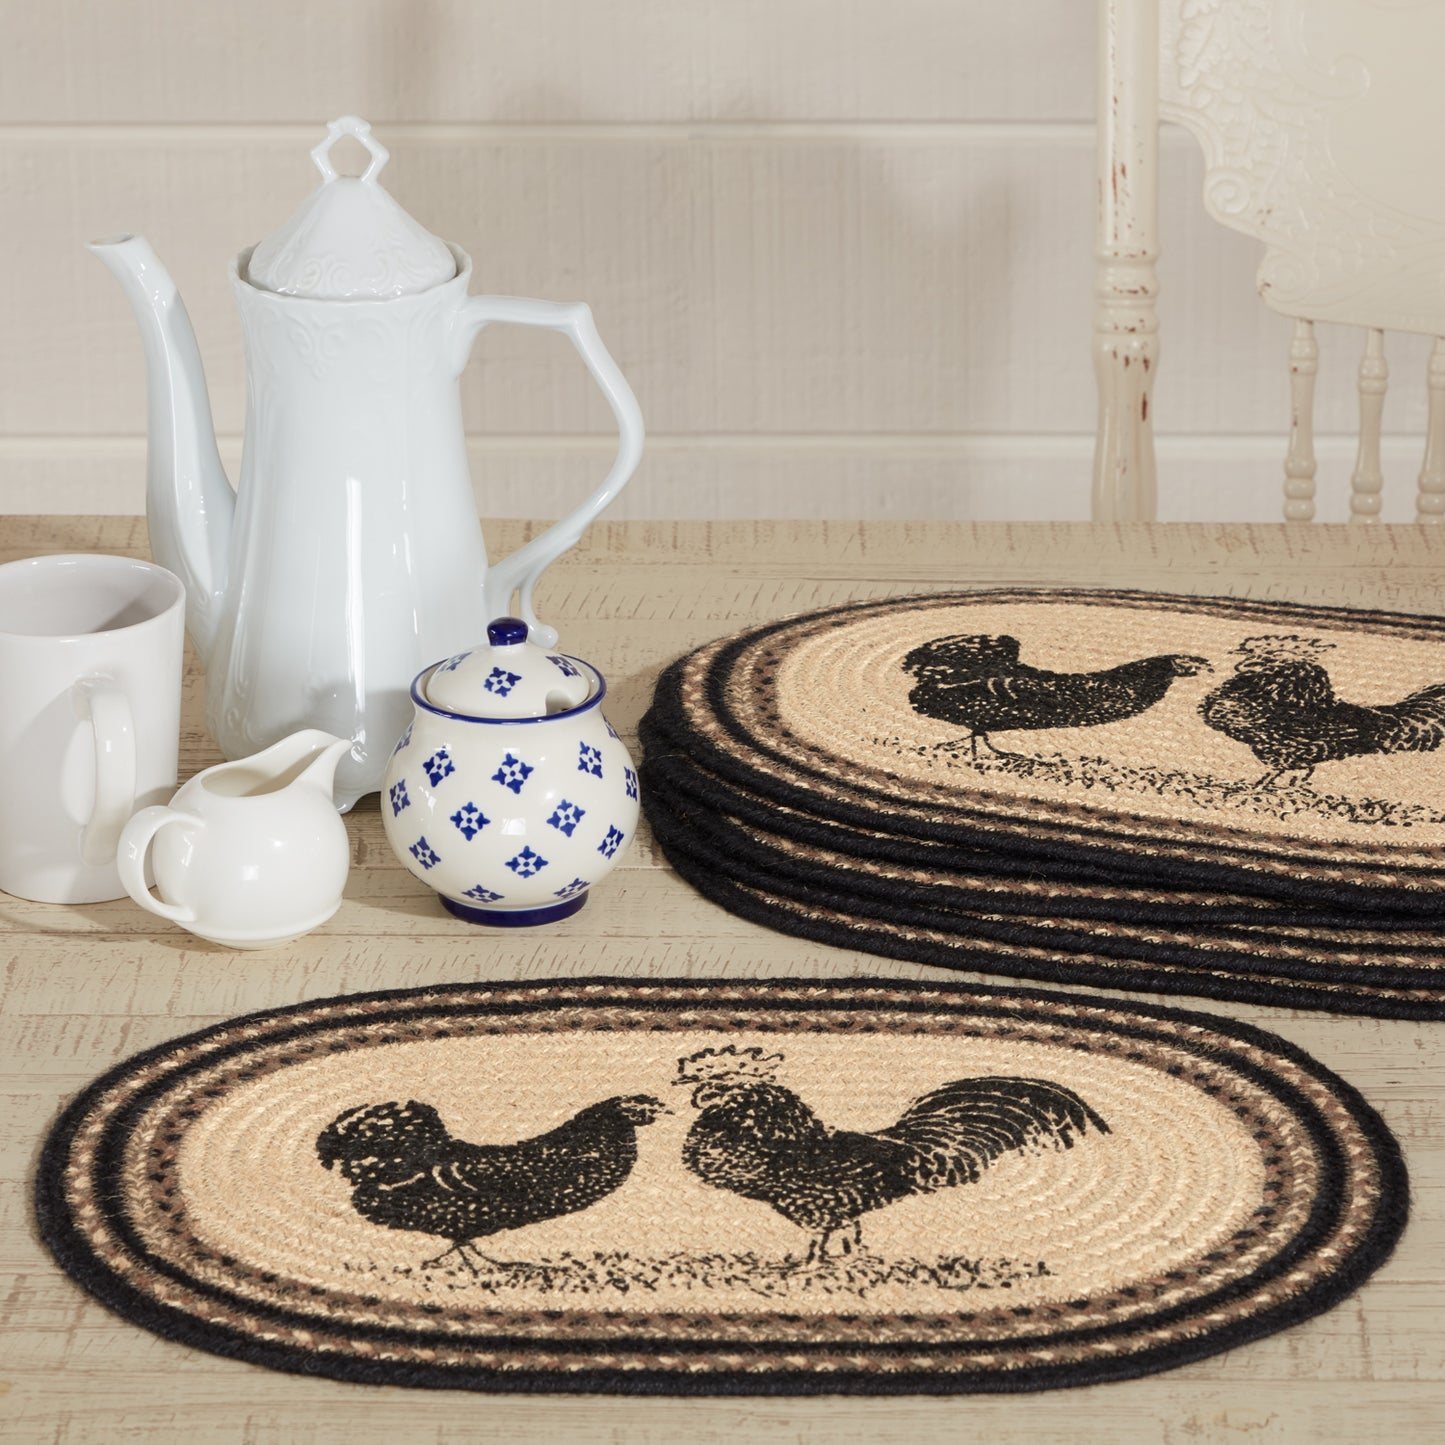 34065-Sawyer-Mill-Charcoal-Poultry-Jute-Placemat-Set-of-6-12x18-image-1